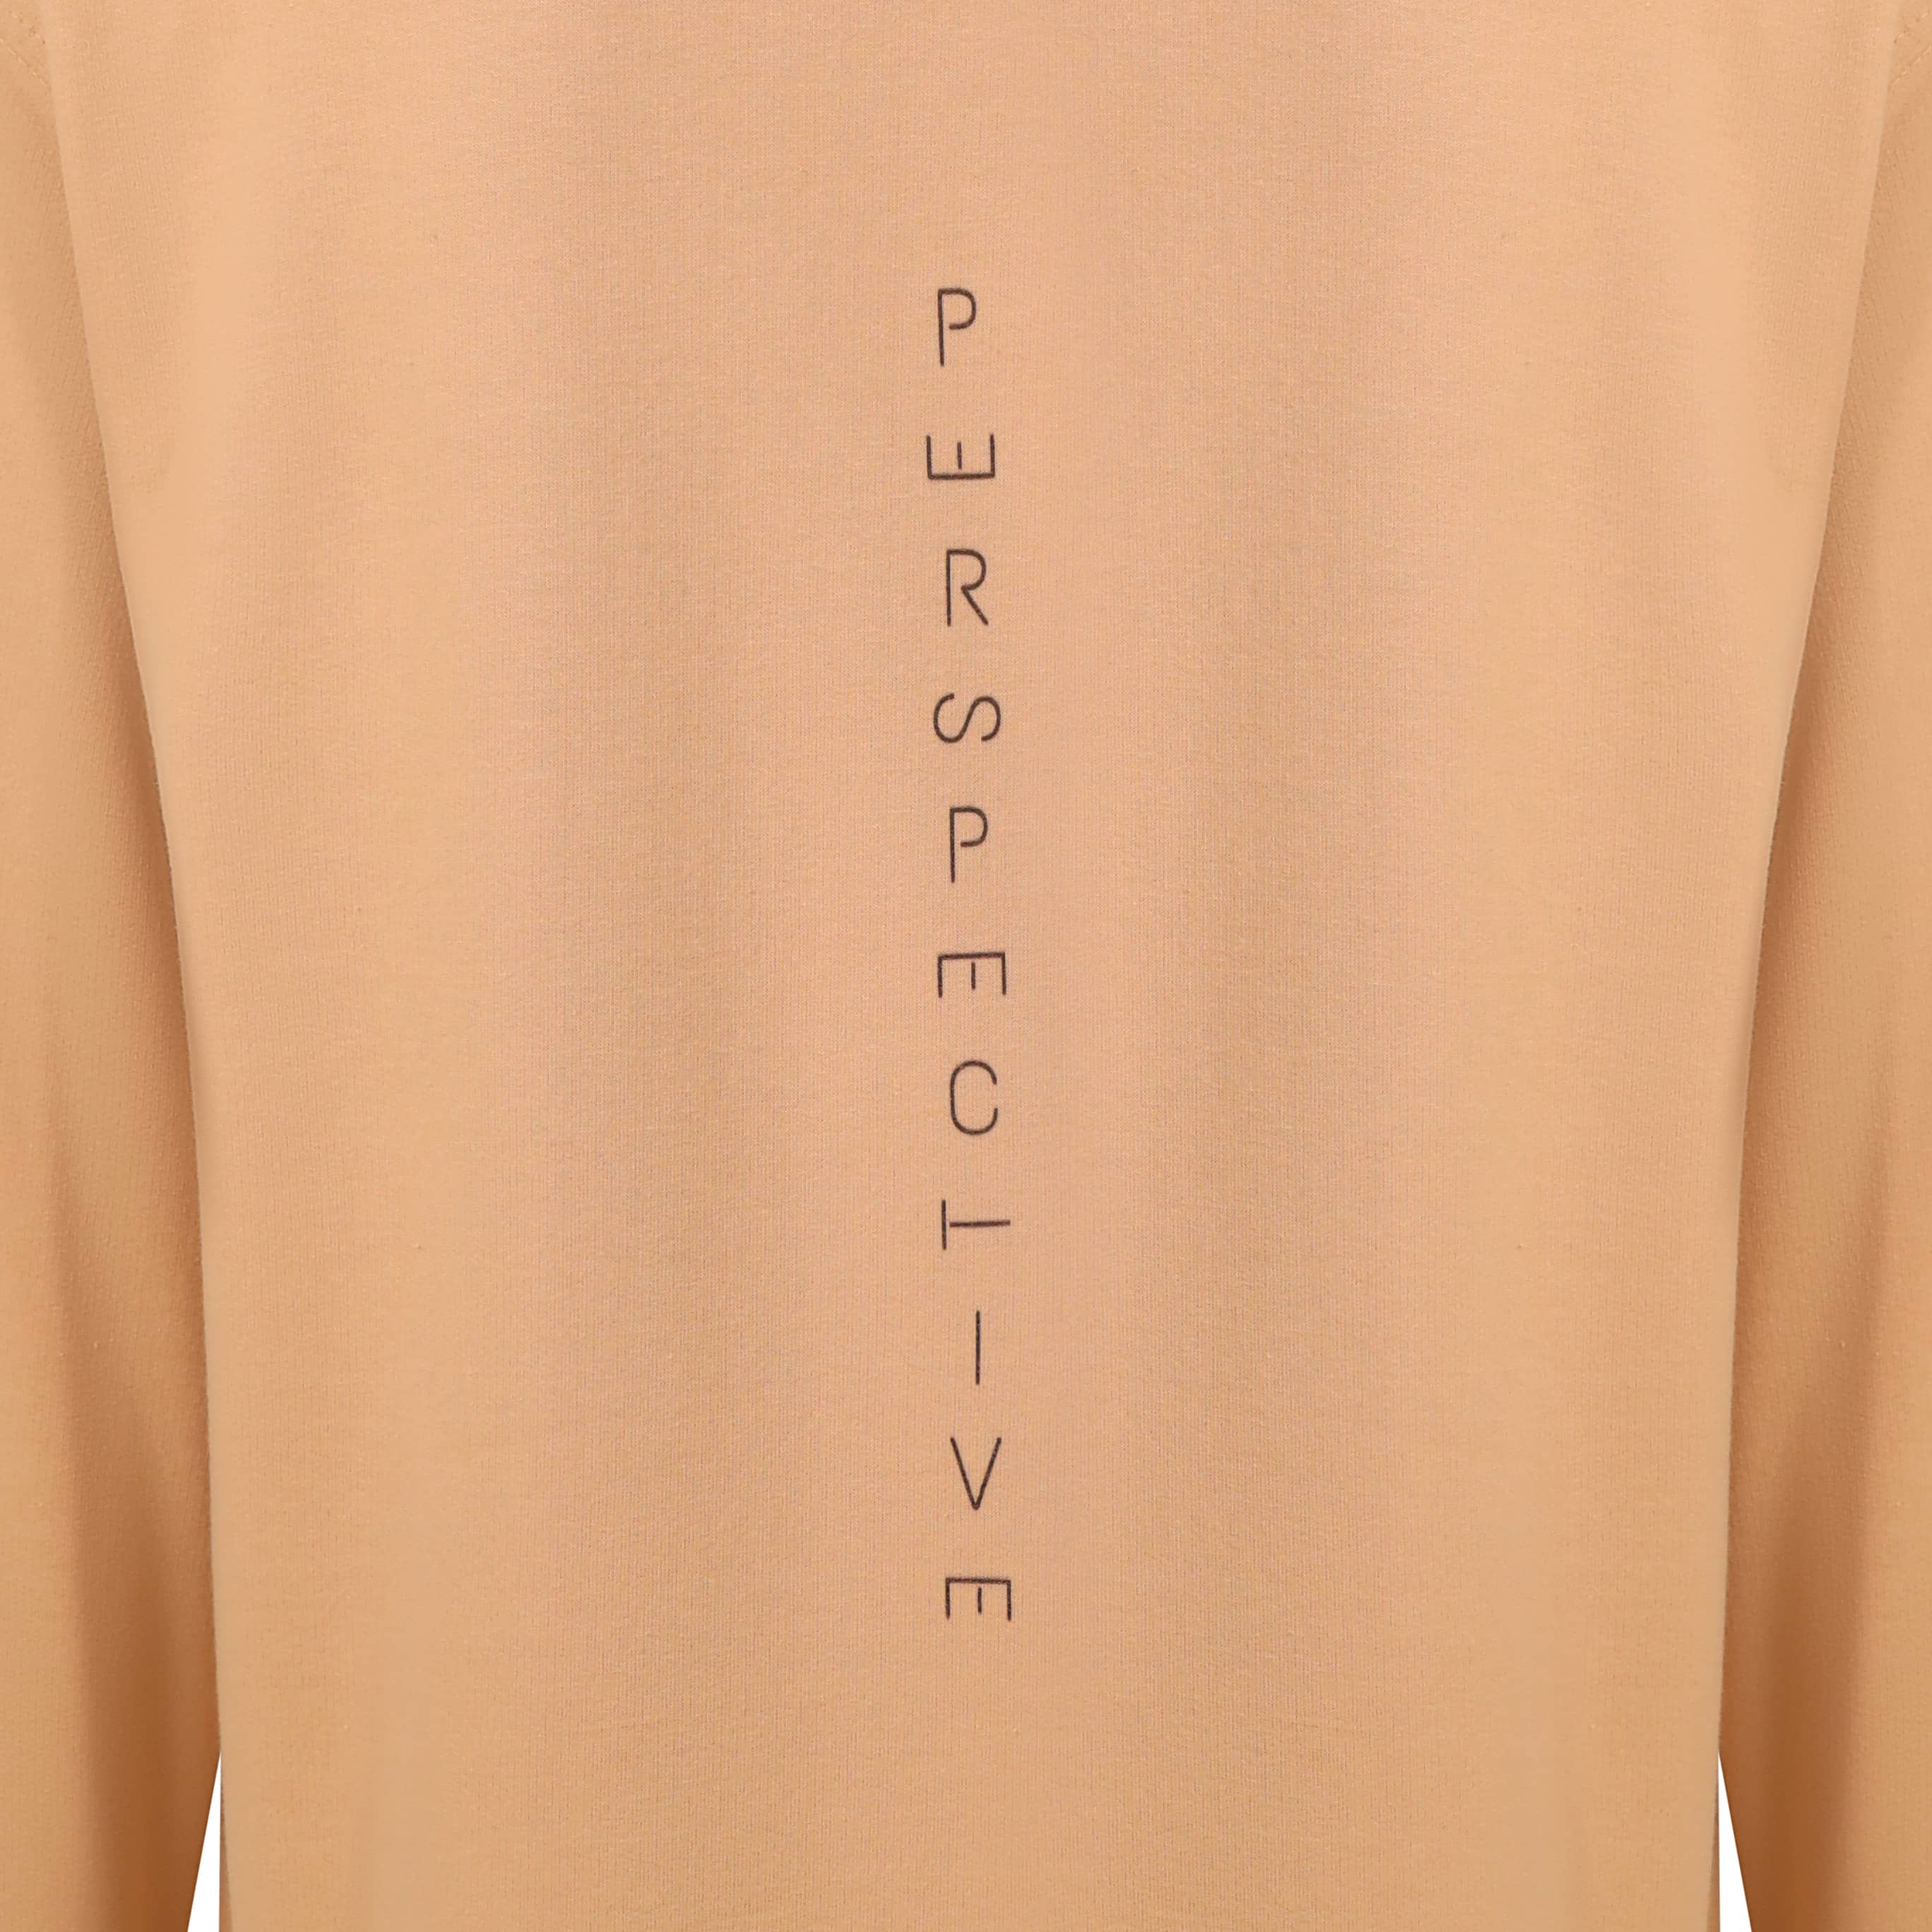 Sweatshirt with "perspective" down the back of the jumper. Letters in the word of perspective are tilted to give perspective to the word perspective